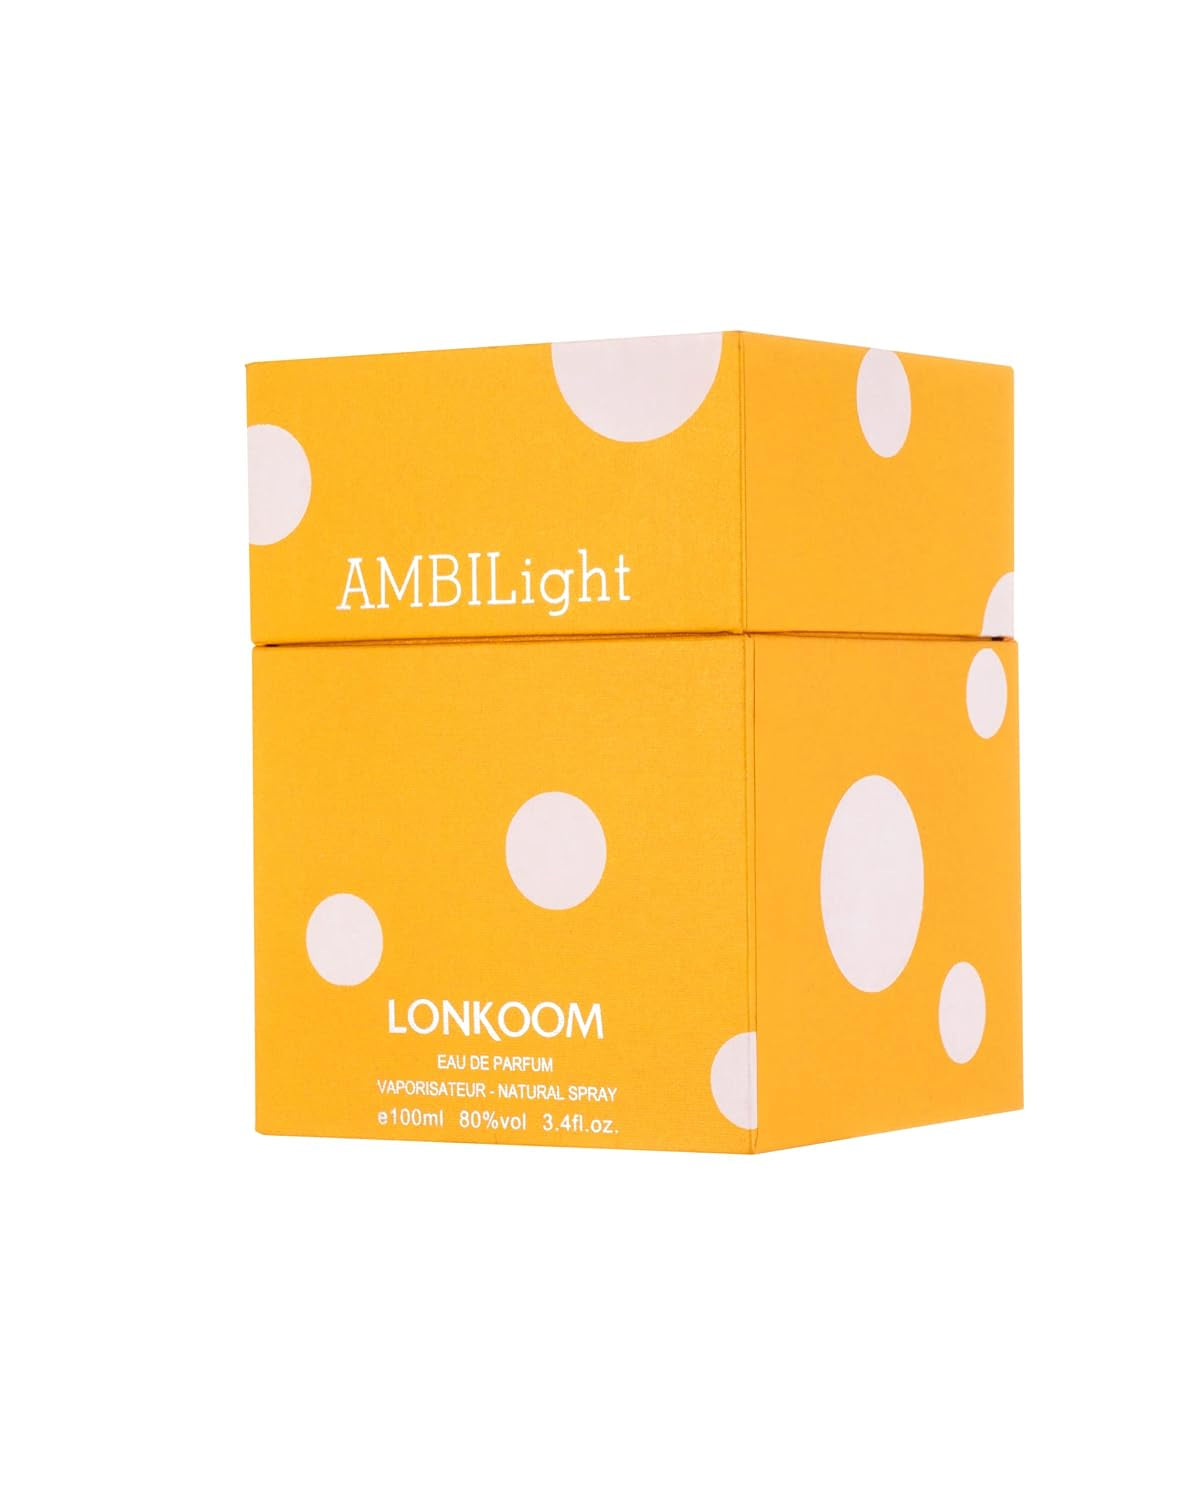 Lonkoom Ambilight - Yellow - Fragrance for Women - Fruity and Floral Scent - Perfume Notes of Lychee, Rose, Peony, Lily, Amber, Cedar, Musk - Long Wearing Aromatic Projection - 3.4 oz EDP Spray